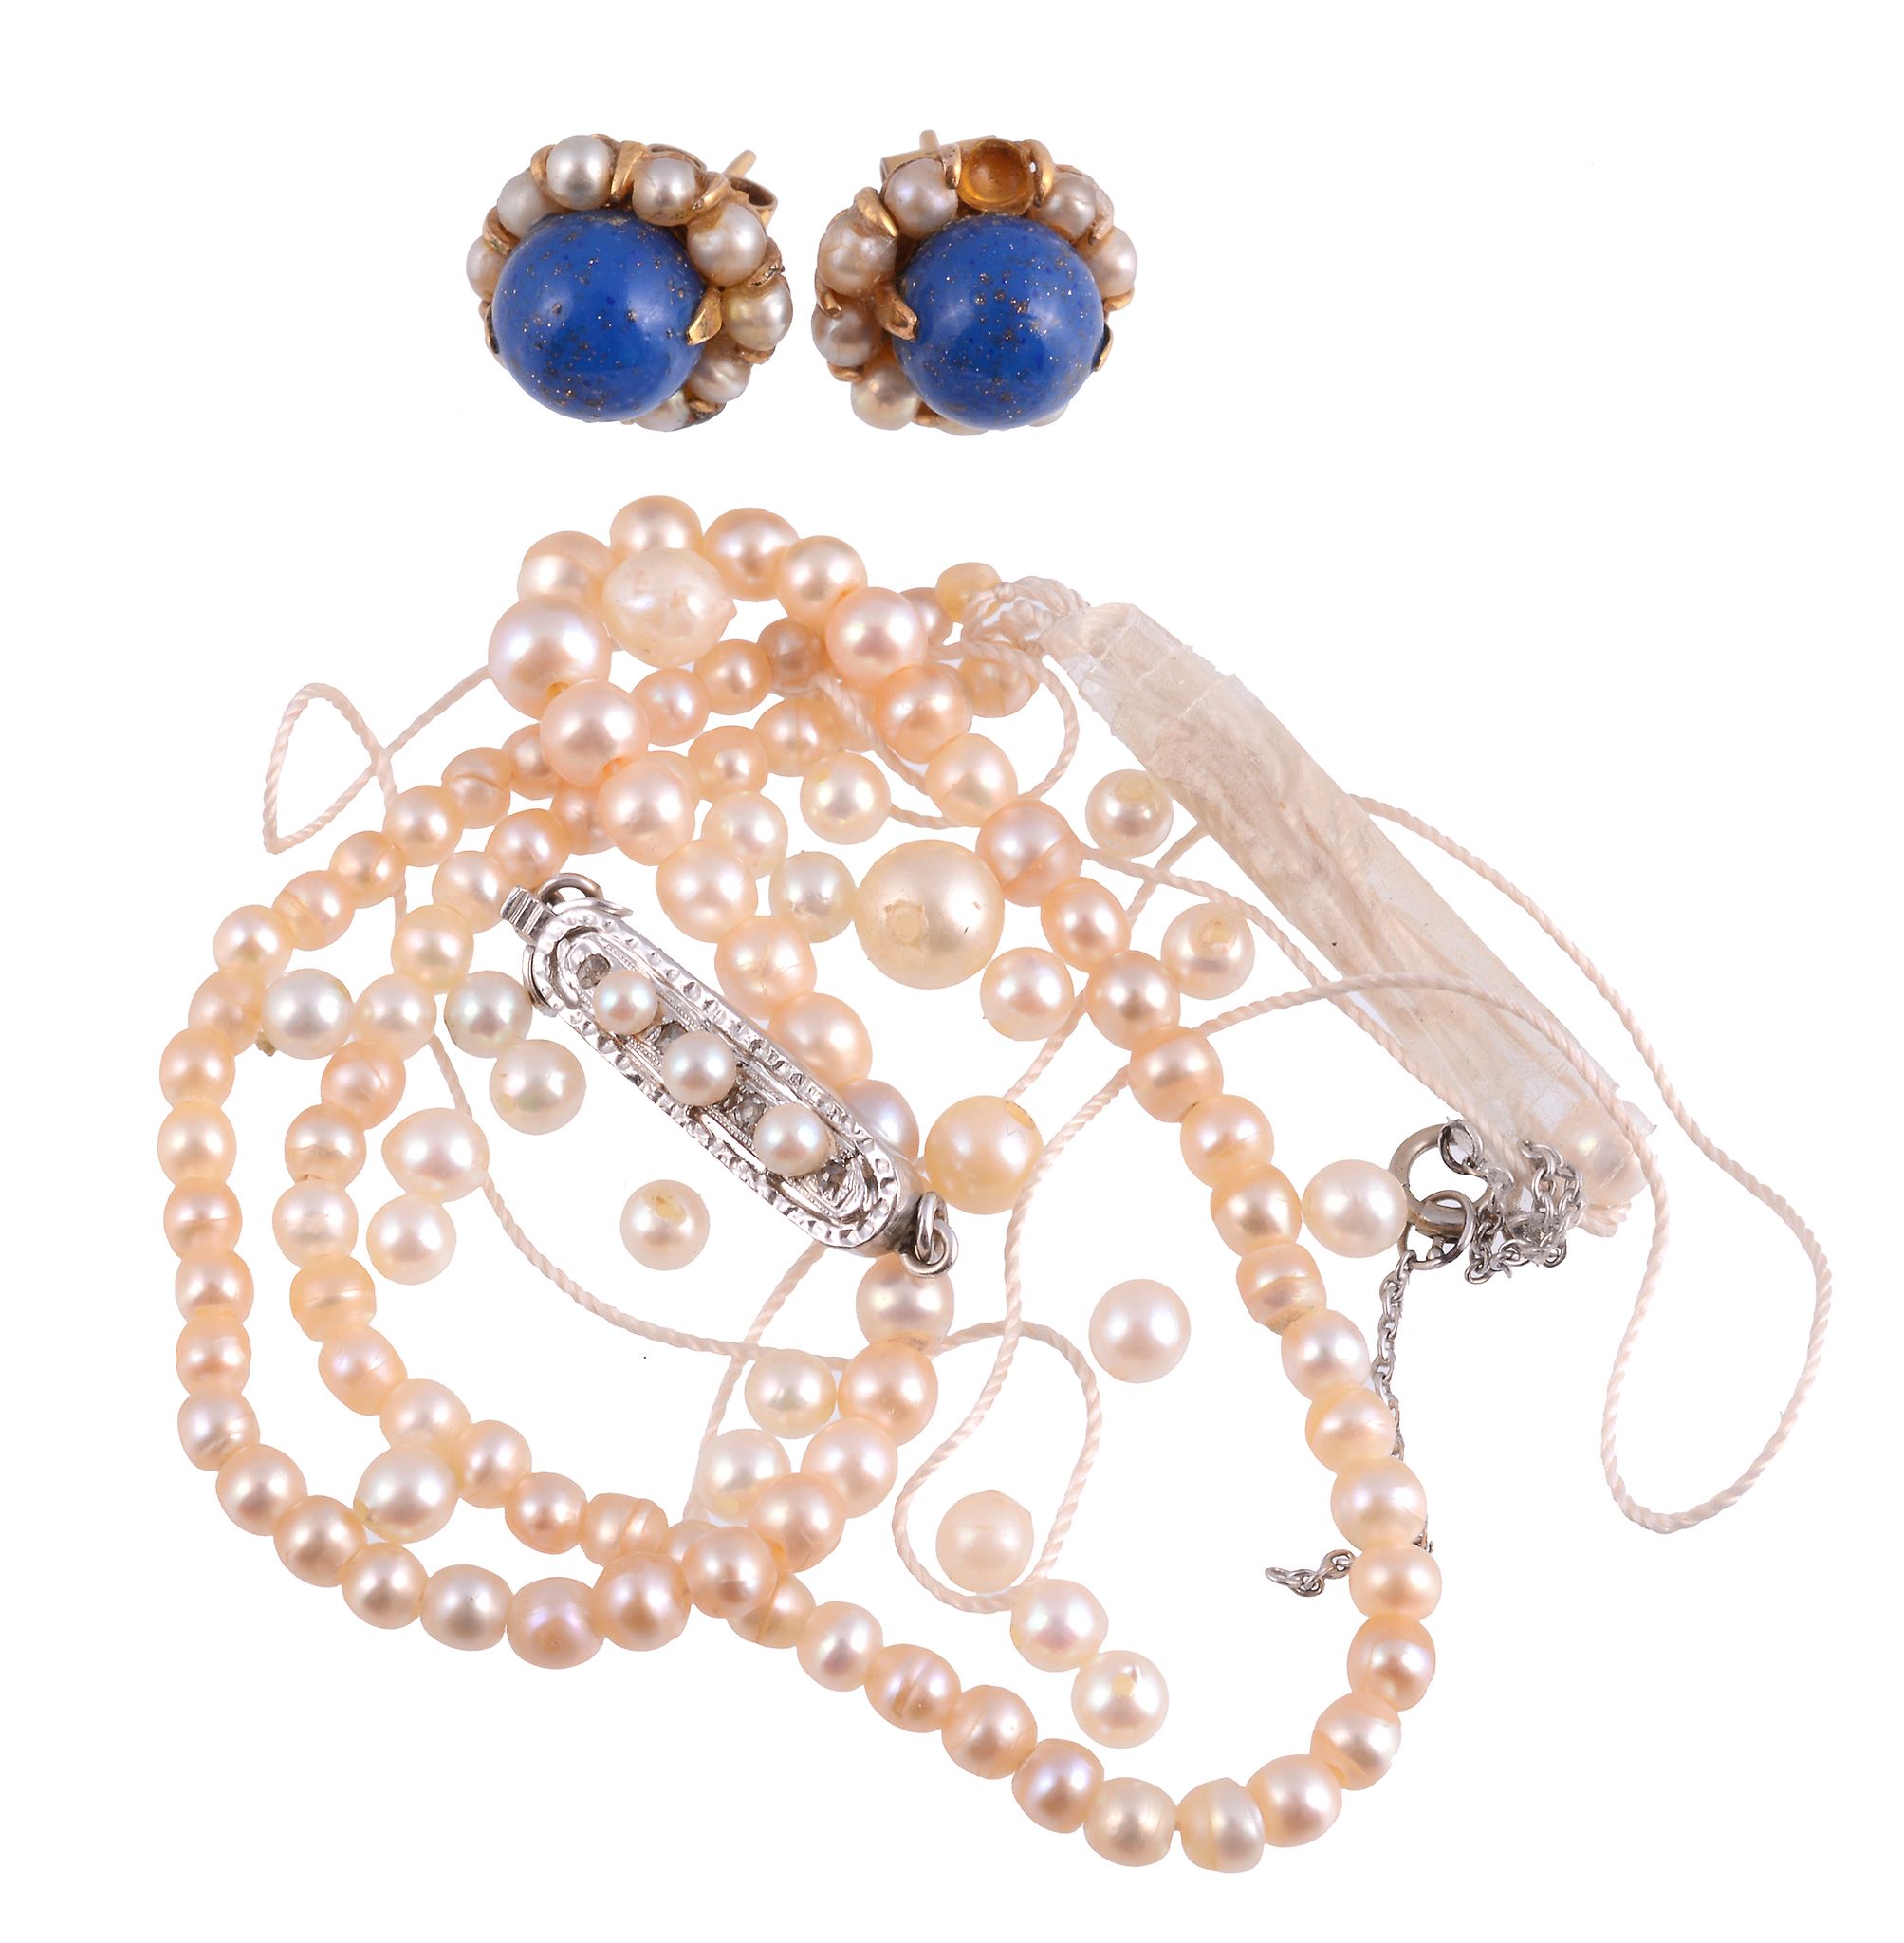 A strand of pearls,   composed of graduated pearls on a string; loose cultured and simulated